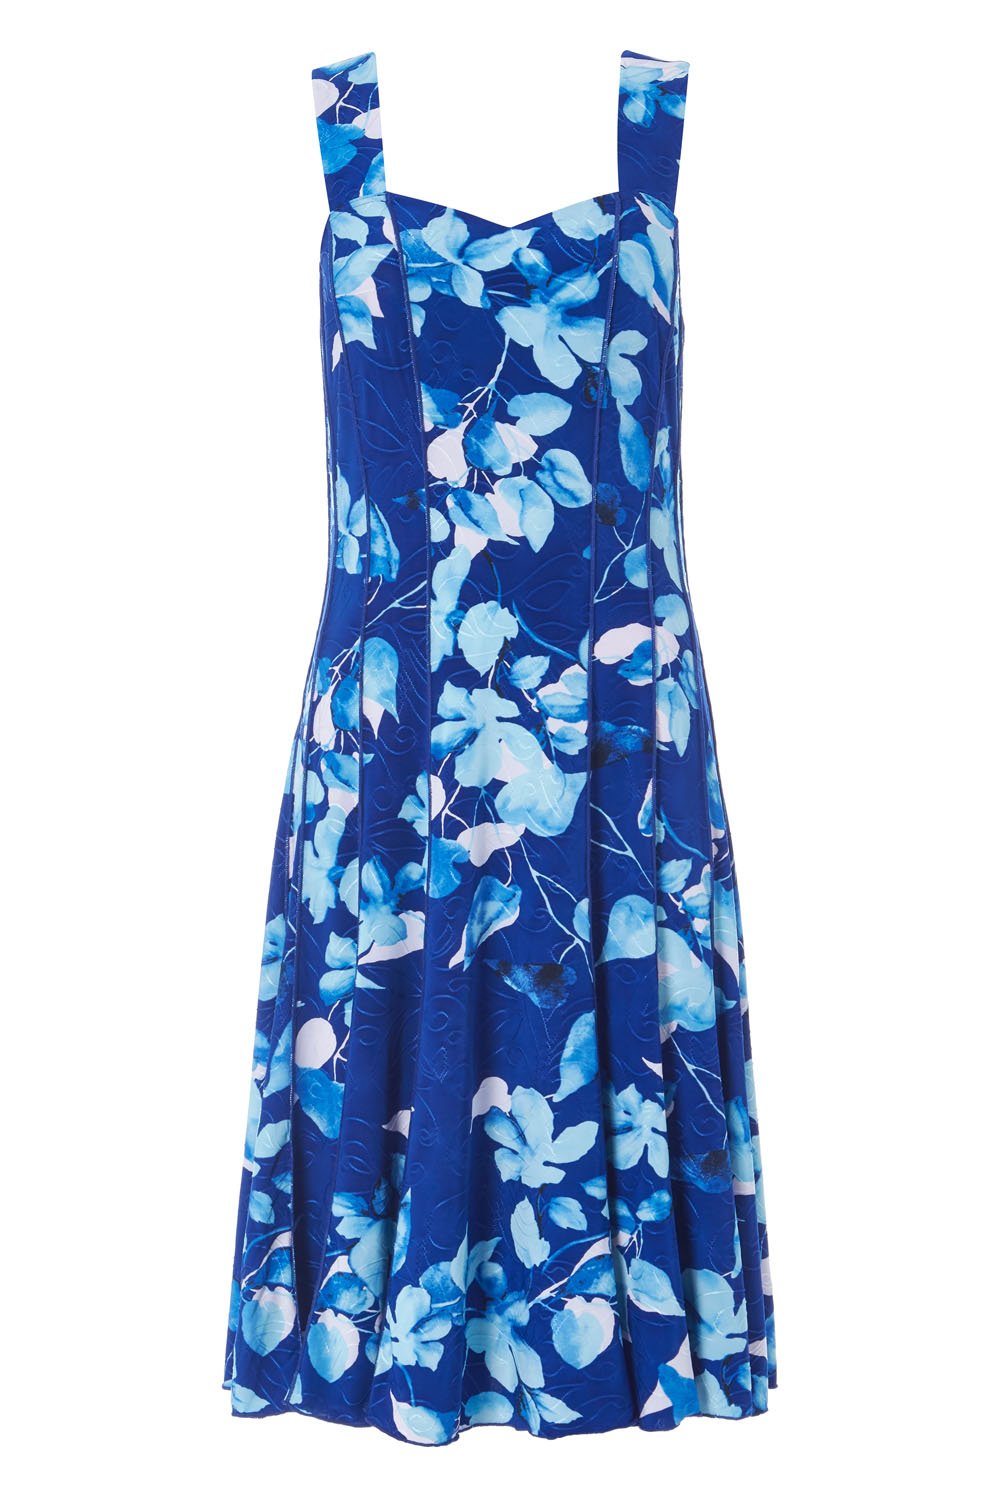 Royal Blue Floral Print Panel Fit and Flare Dress, Image 4 of 4